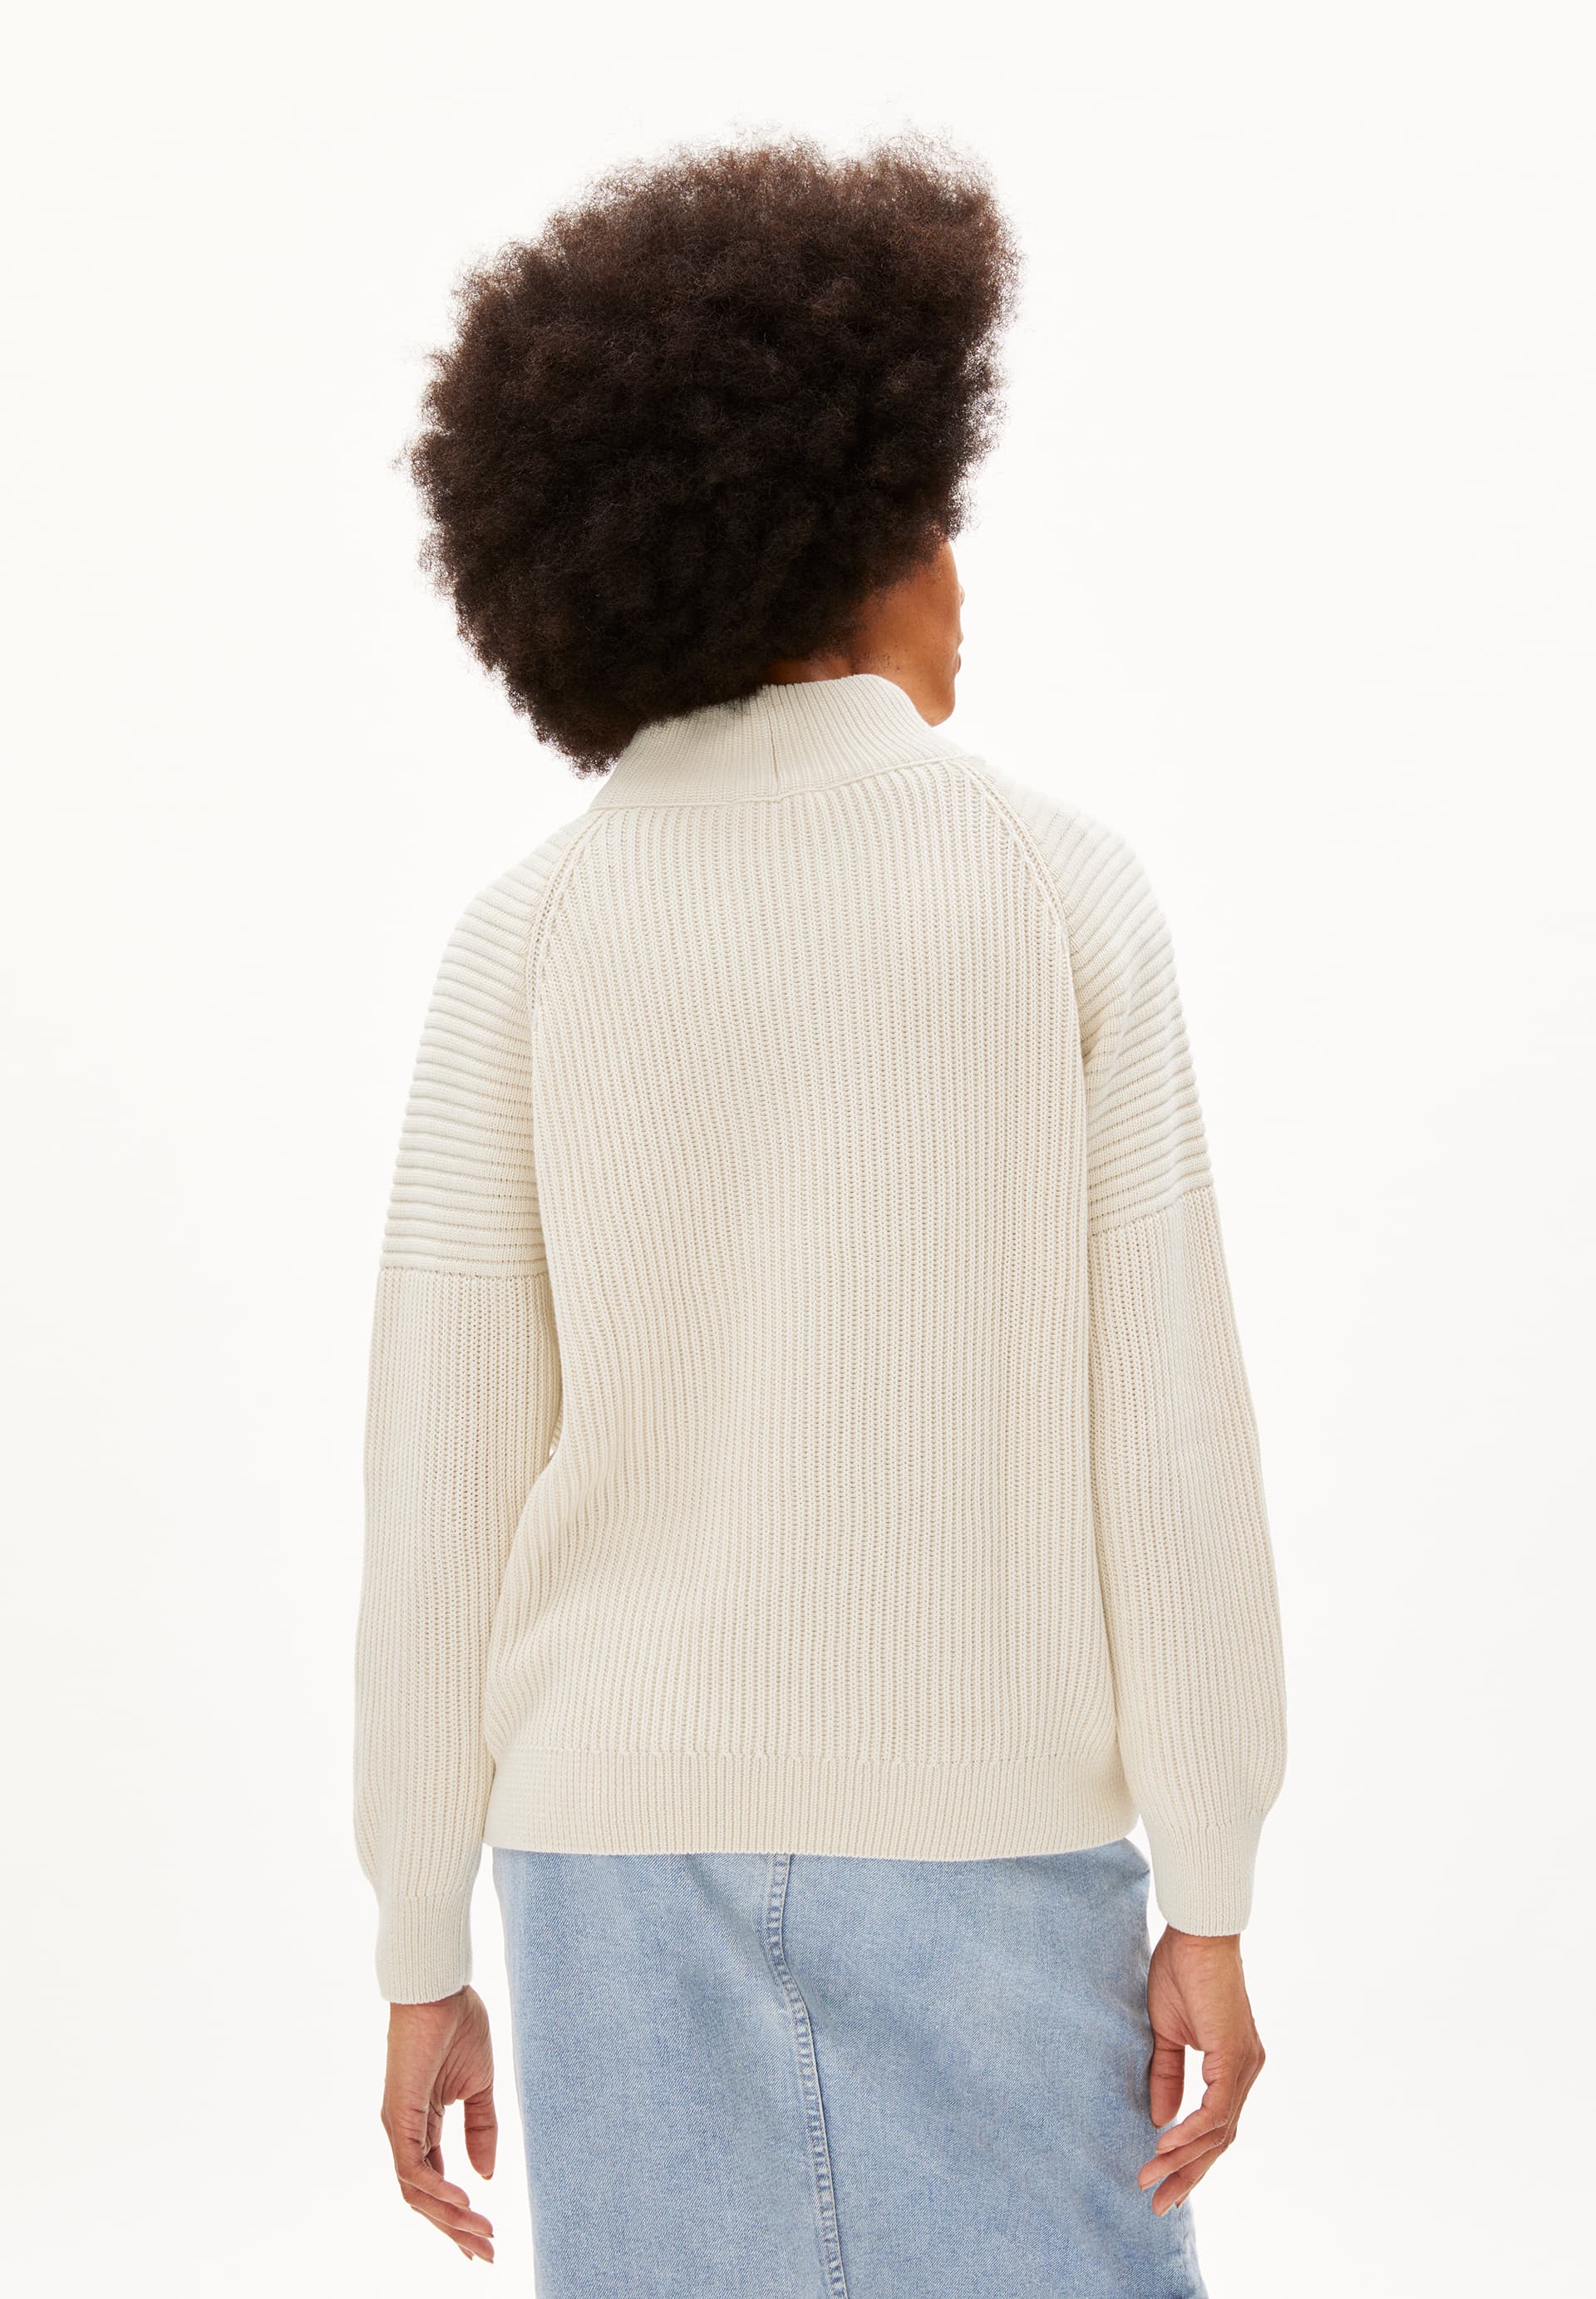 RONYIAAS Sweater Loose Fit made of Organic Cotton